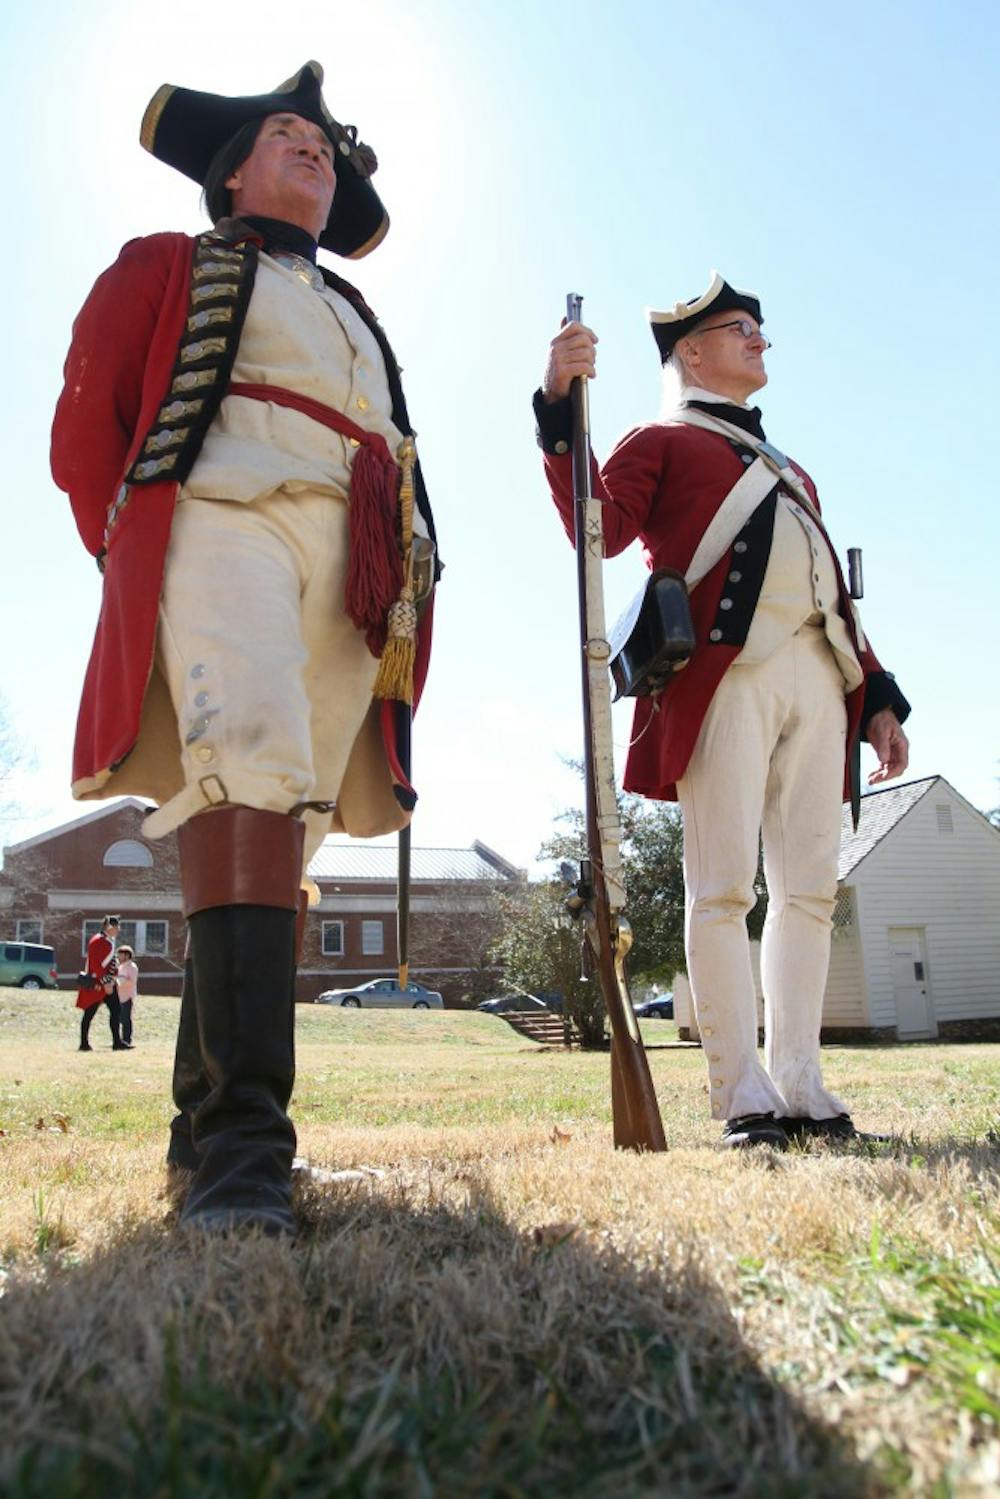 Revolutionary War reenactment as part of Twelfth Annual Revolutionary War Living History Day in Hillsborough Saturday 2-22-14. Reenactment of His Majesty's 64th regiment of foot during the year of 1781. Left- David Snyder is from Efland, reenacting a Captain of Infantry, been reenacting since 1976 and started because of the bicentennial. He has an interest in American history and wanted to learn more about the British side of the story. Here he speaks to a crowd about weapons, clothing, and strategies of war. Right- Ed Franz has been reenacting since 1995, when a friend encouraged him to "come out and play" in a historical period. He has loved learning about a time that he had previously been disinterested in.